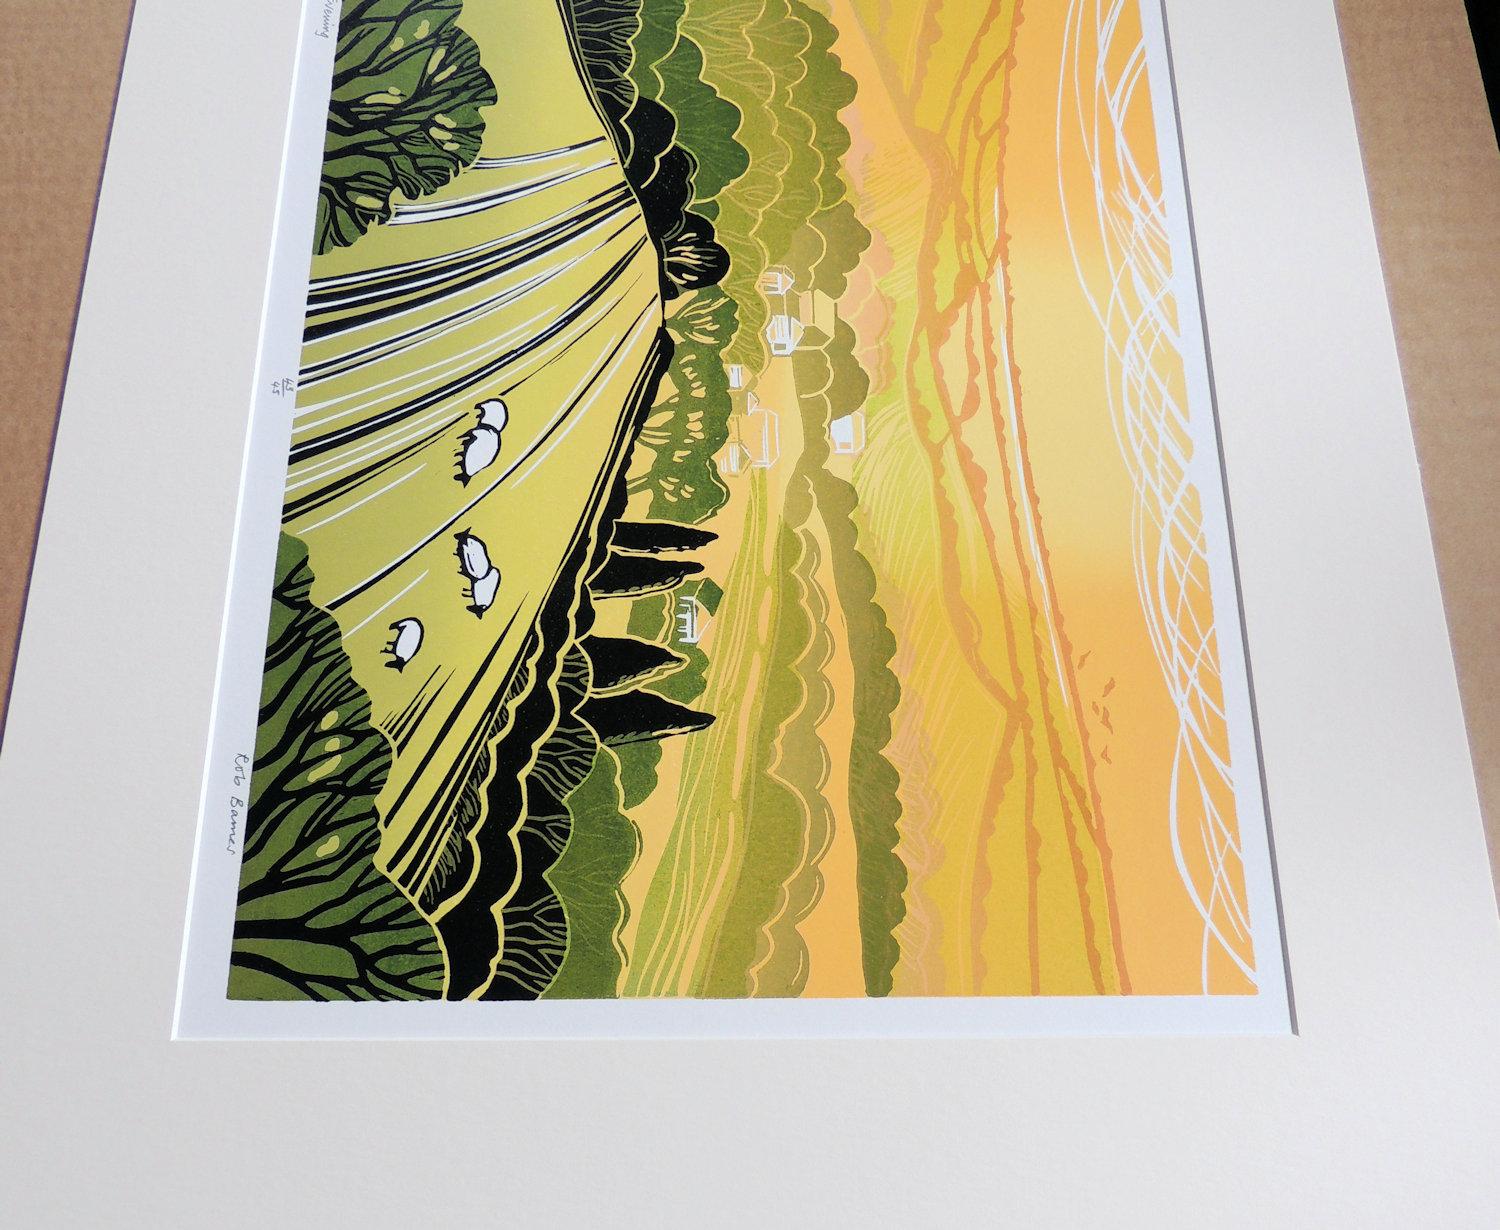 Rob Barnes
Summer Evening
Limited Edition Linocut Print
Edition of 50
Image Size H 44cm x W 33cm
Sheet Size H 49cm x W 61cm
Sold Unframed mounted in Antique White mountboard
Free Shipping
Please note that in situ images are purely an indication of